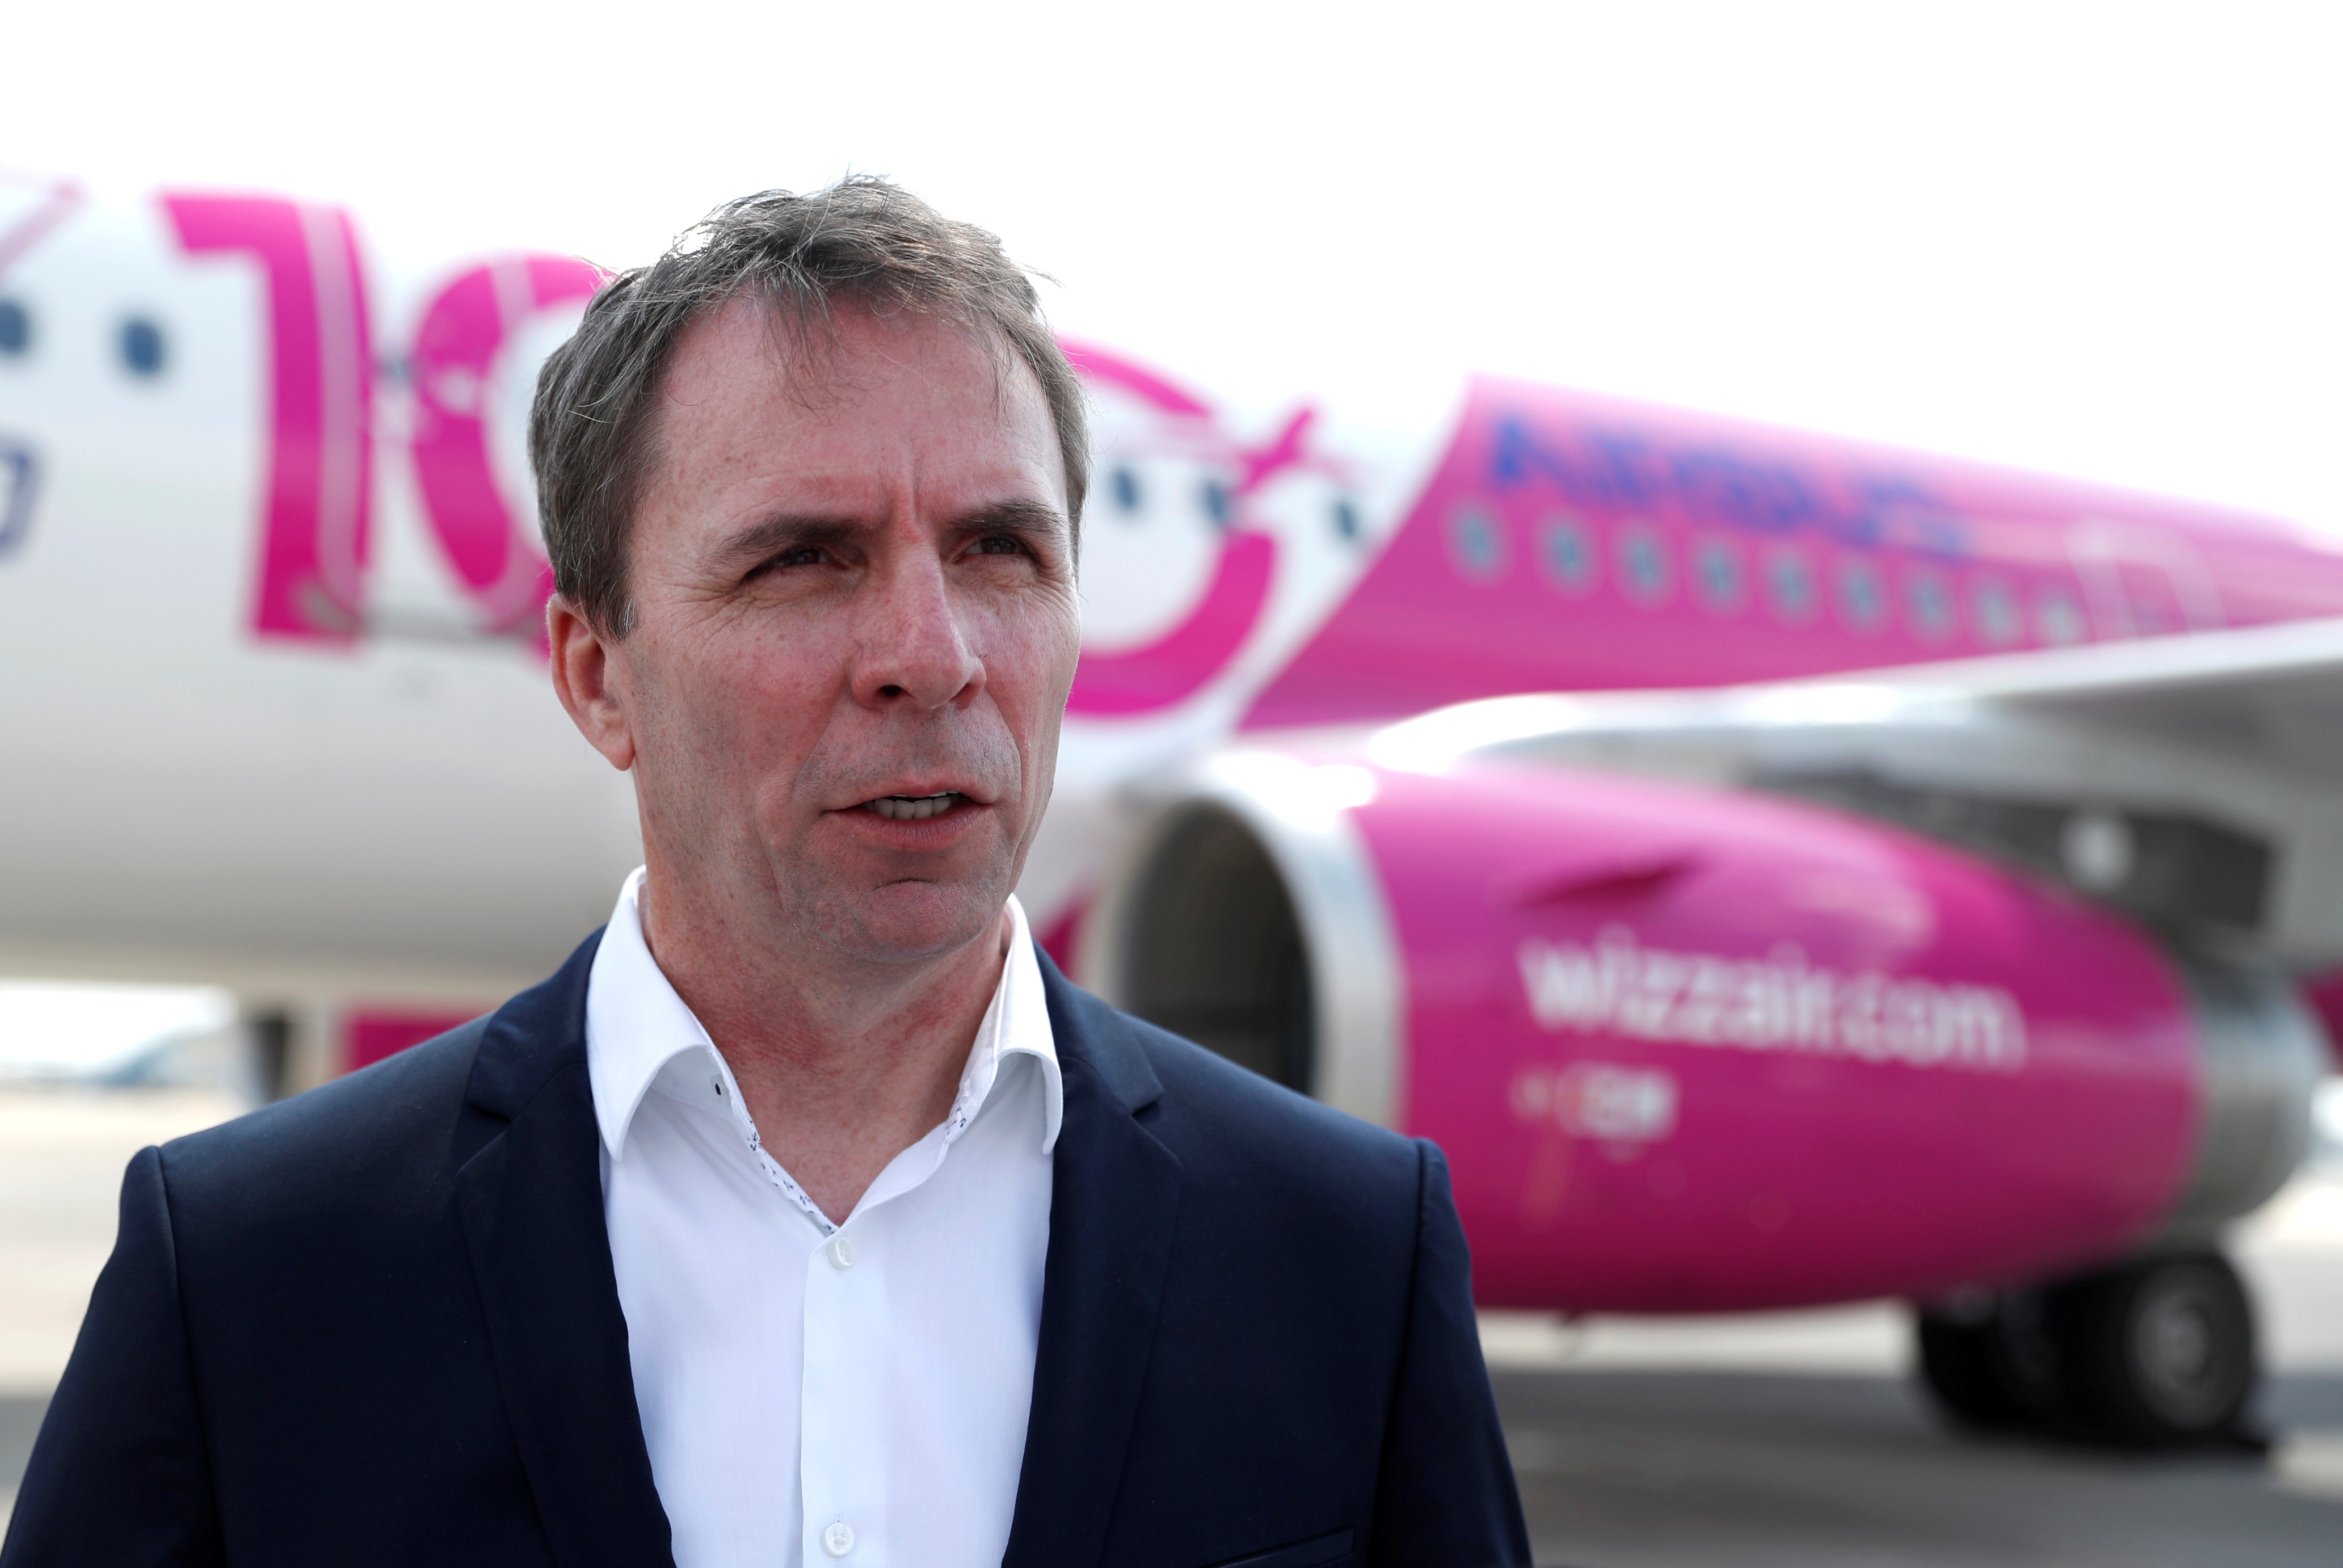 CEO of Wizz Air, Jozsef Varadi, speaks during the unveiling ceremony for the airline's 100th plane